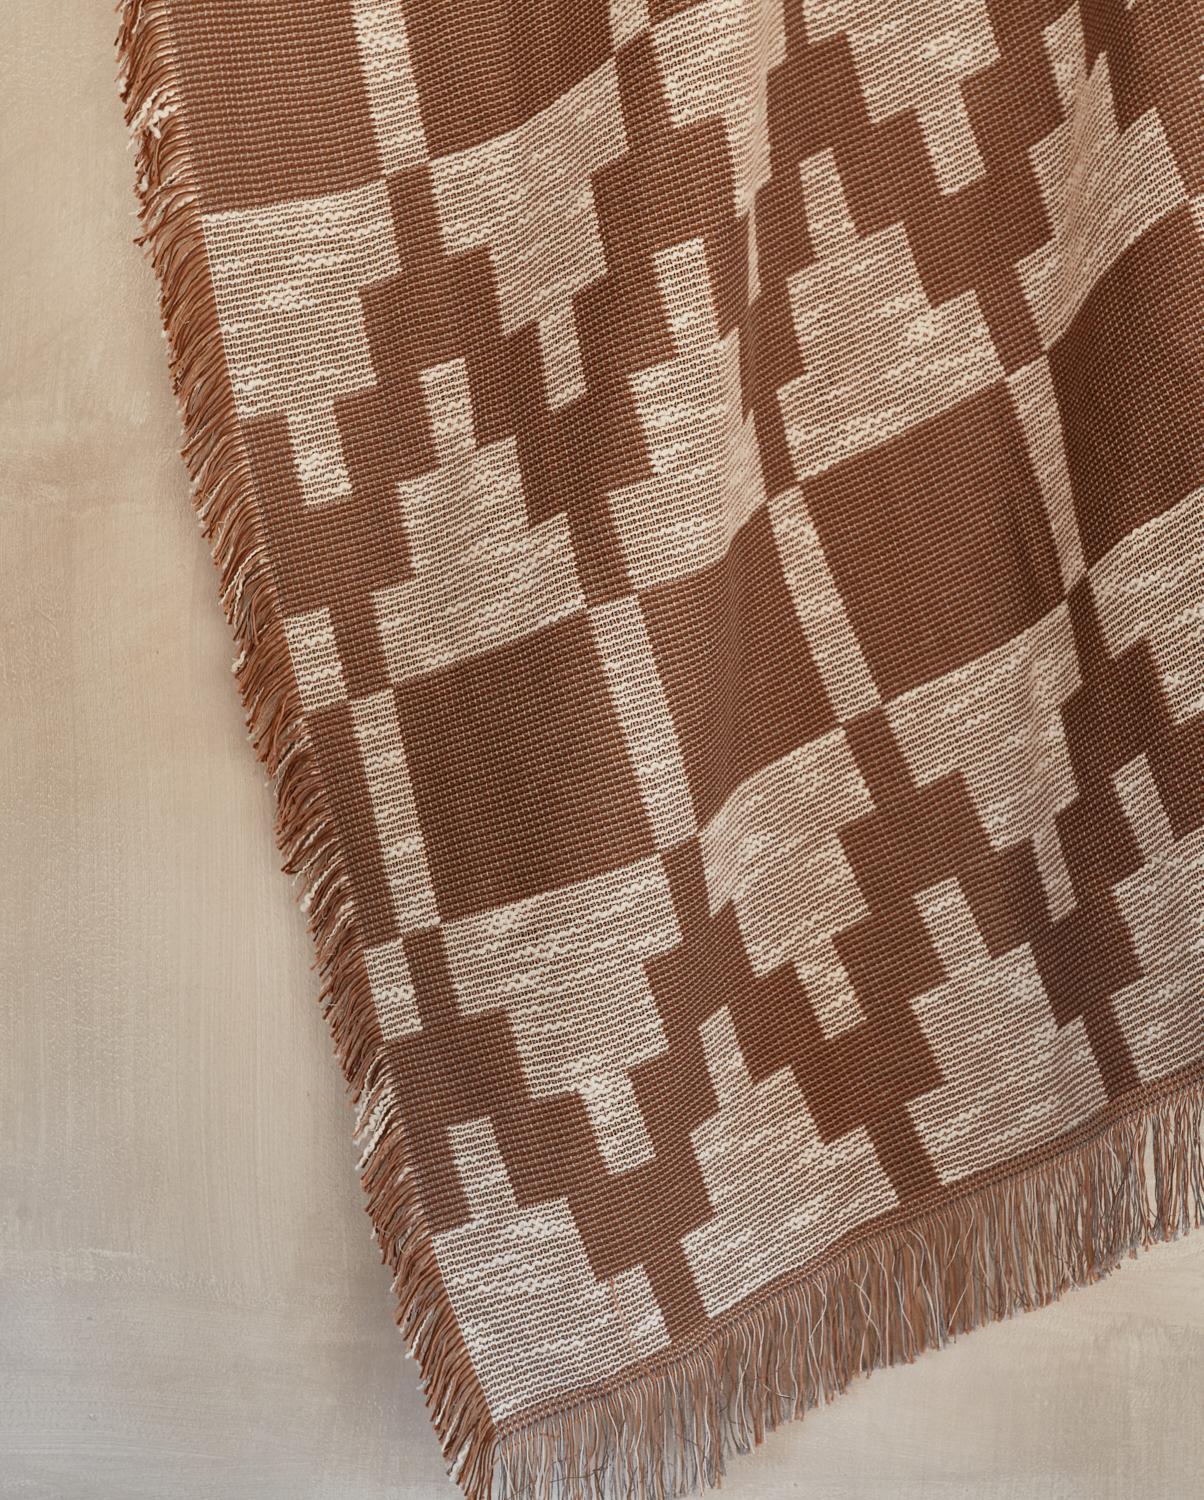 Patterned Woven Cotton Throw Blanket by Folk Textiles (Willa / Mud) In New Condition For Sale In Los Angeles, CA